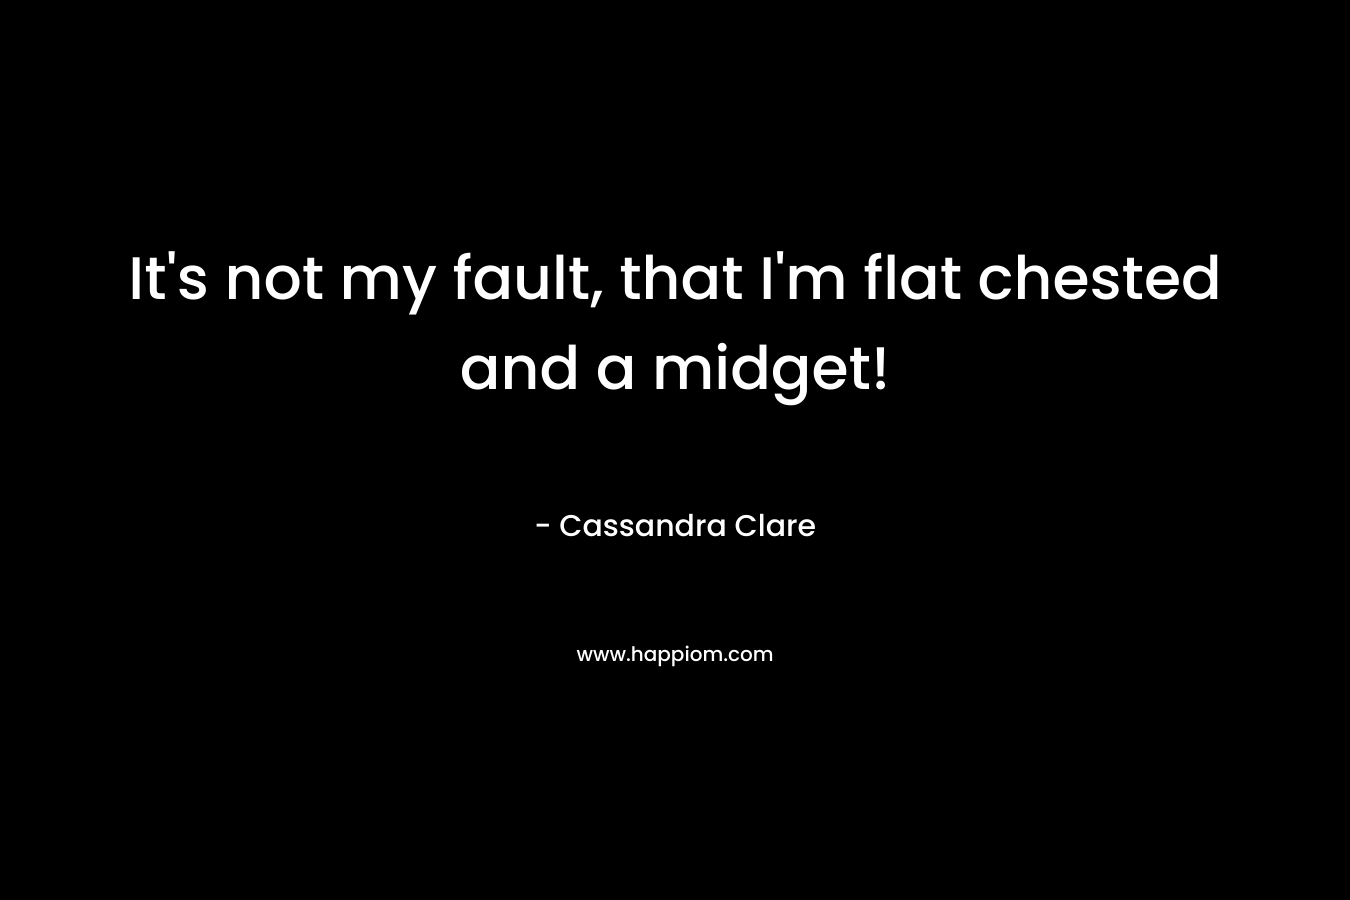 It's not my fault, that I'm flat chested and a midget!